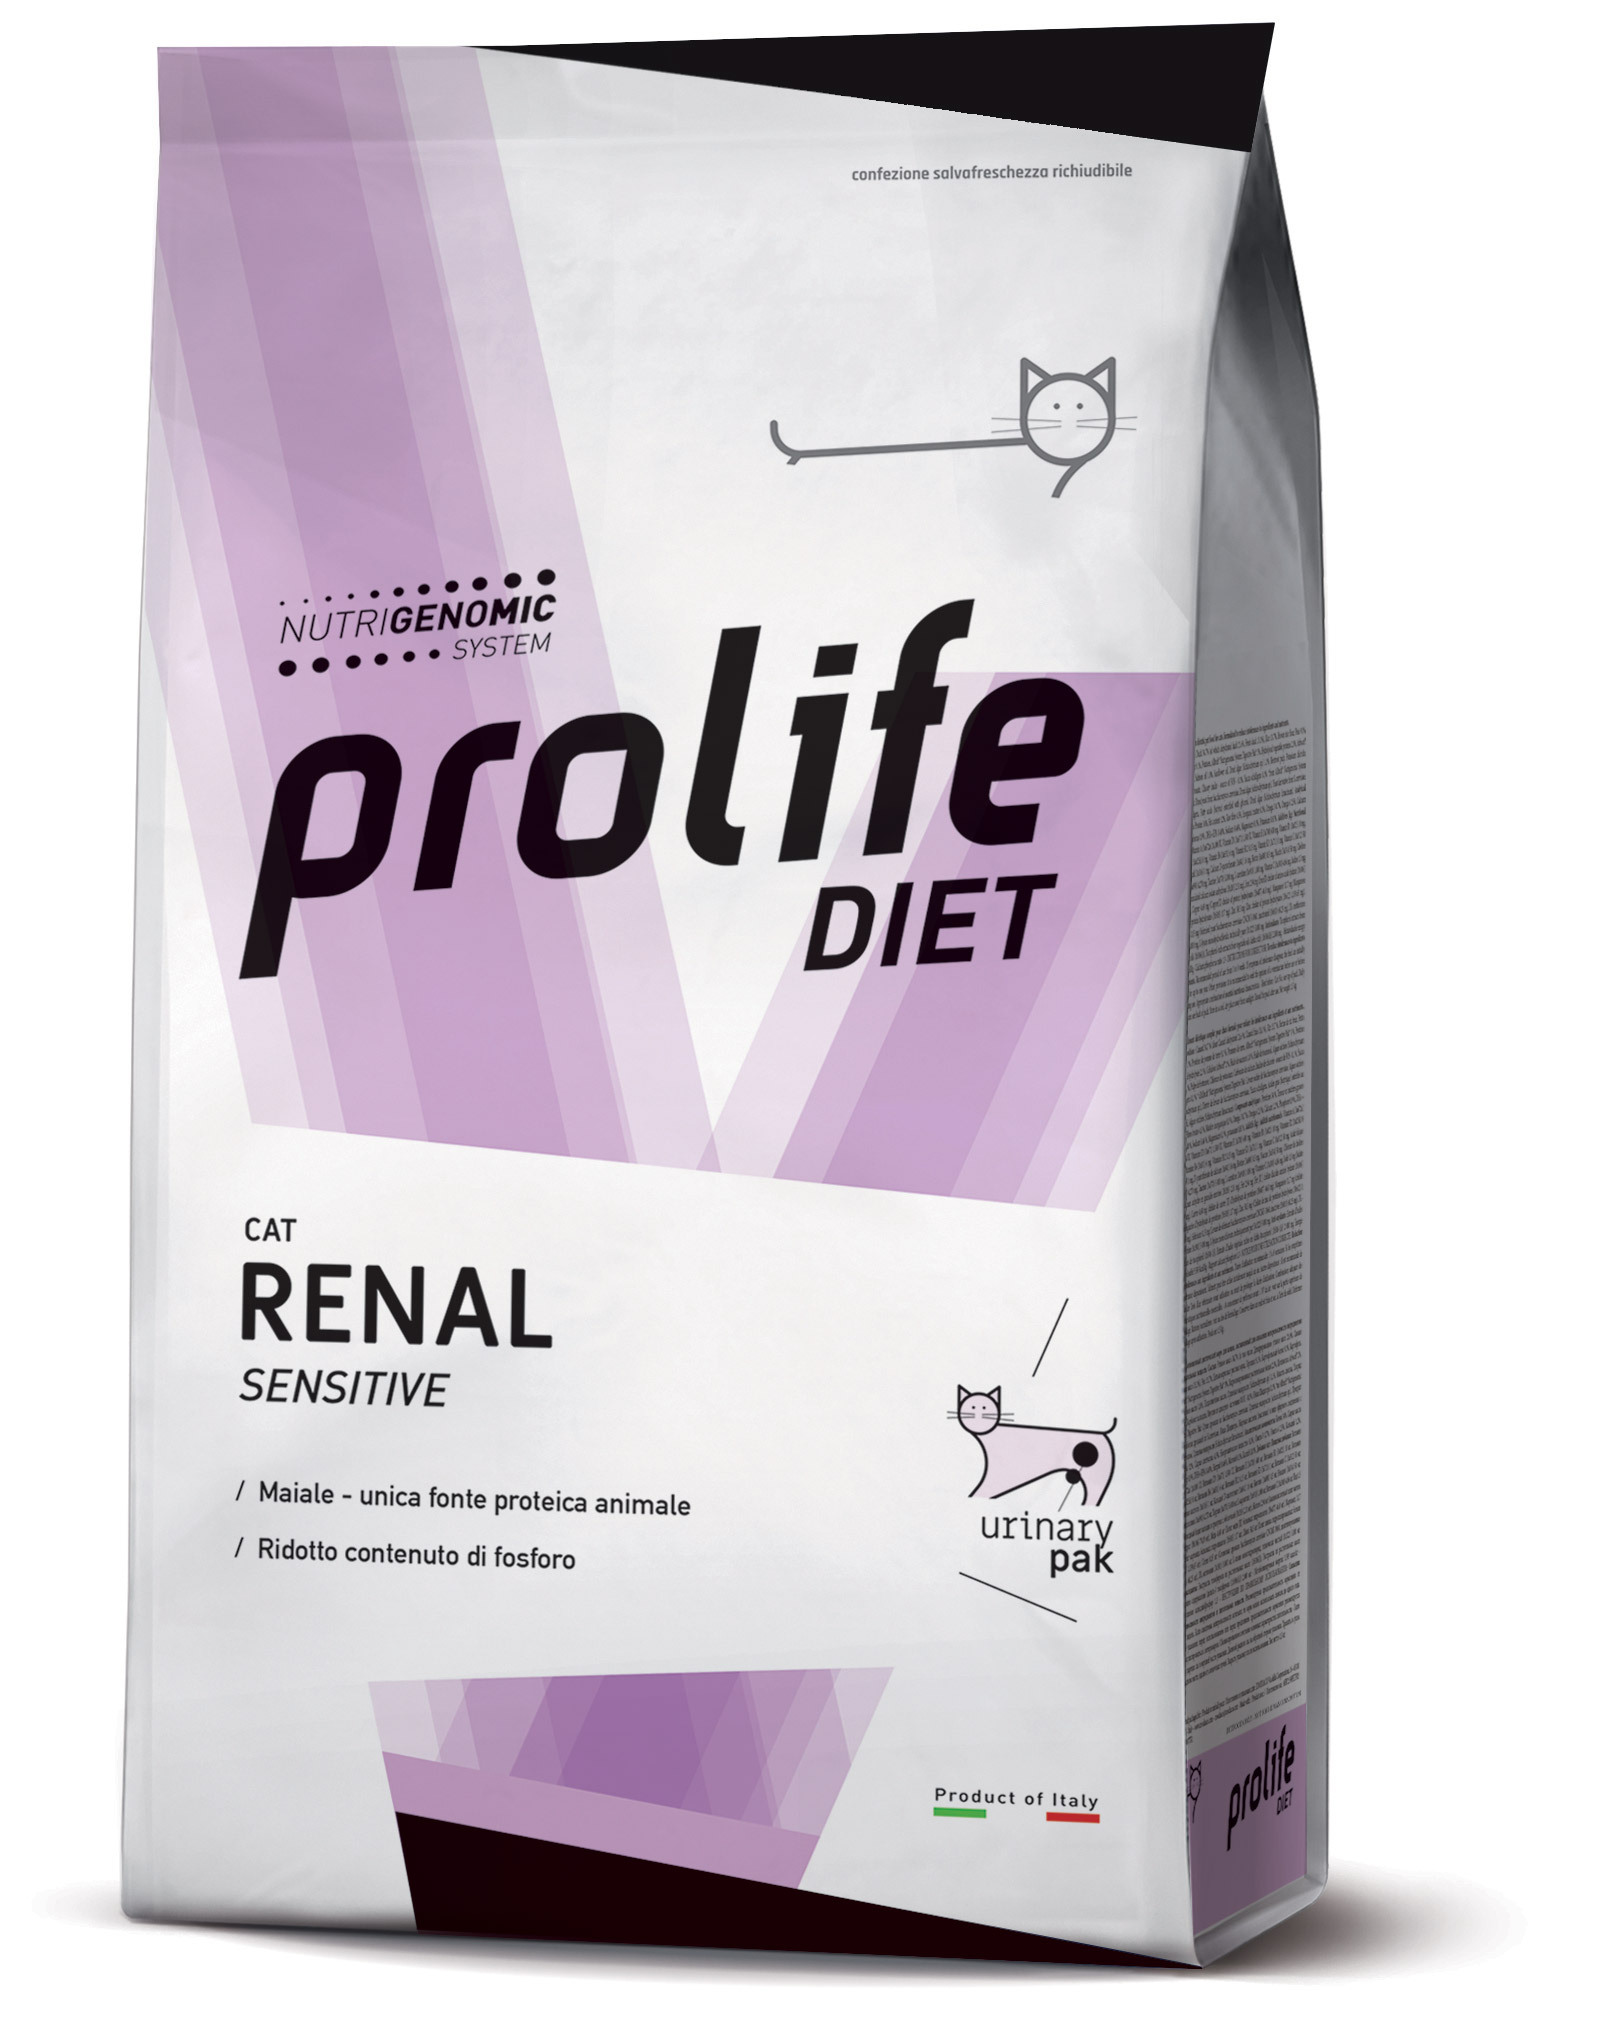 Complete dietetic pet food for cats with overweight or obesity problems.
